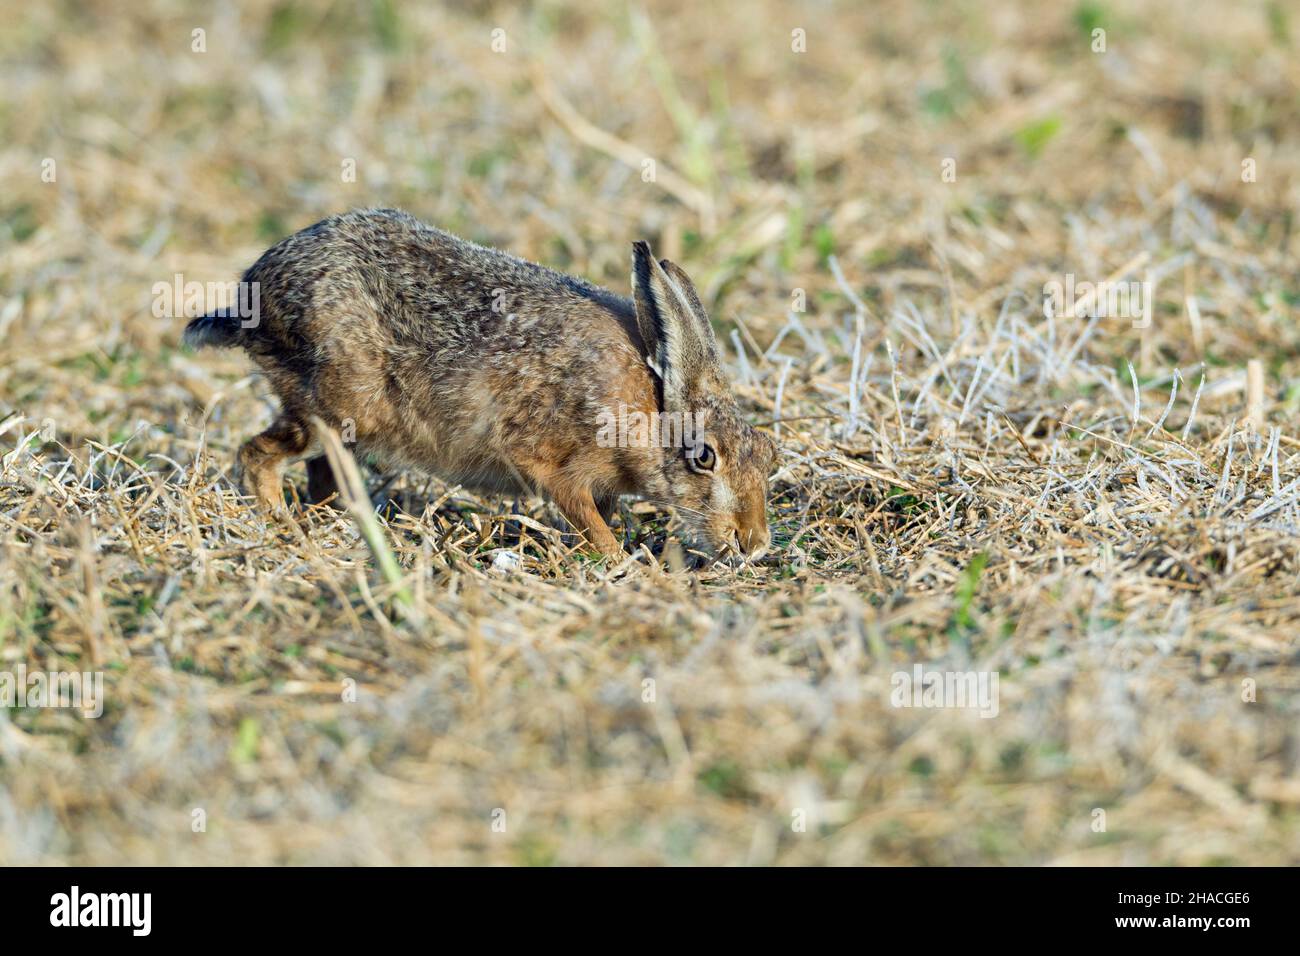 European hare (Lepus europaeus), buck searching for scent of doe, during breeding season, Lower Saxony, Germany Stock Photo